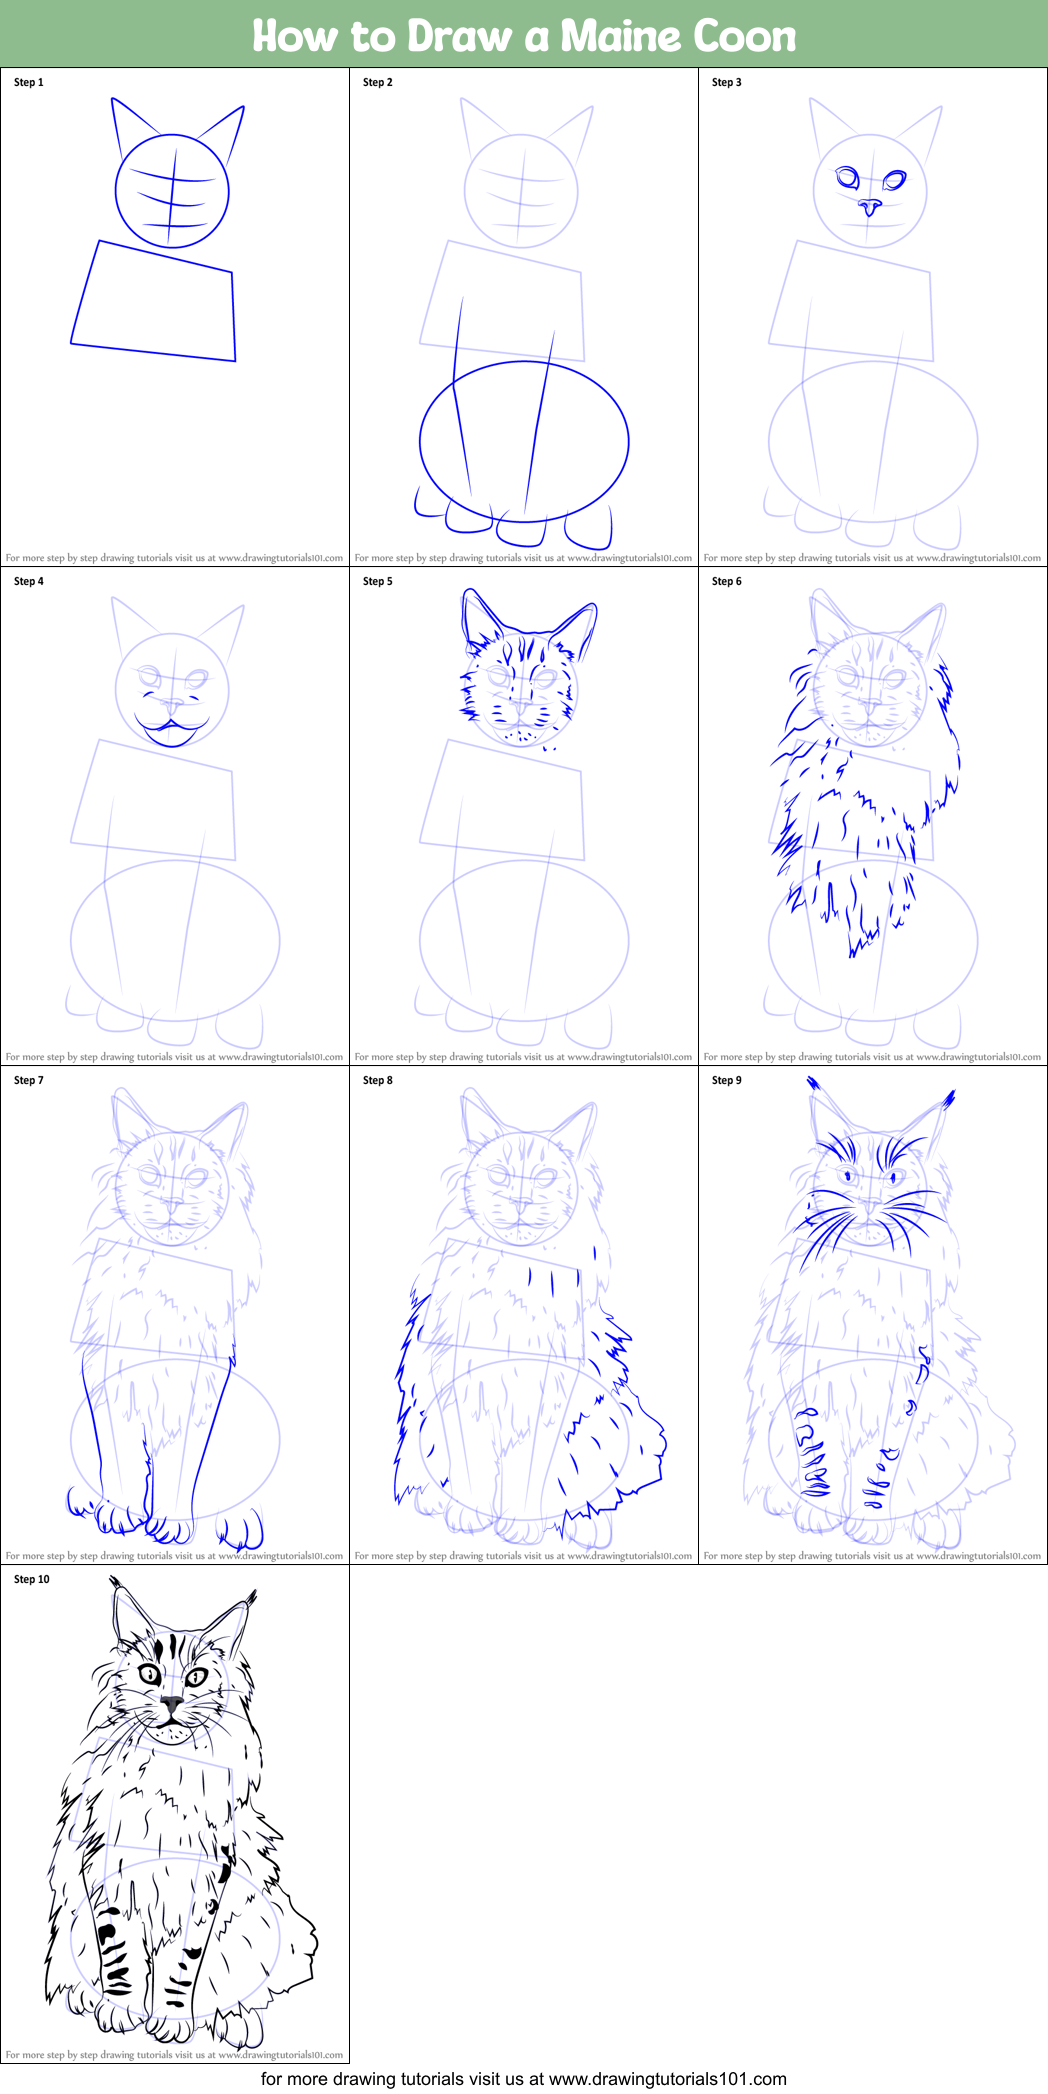 How to Draw a Maine Coon printable step by step drawing sheet